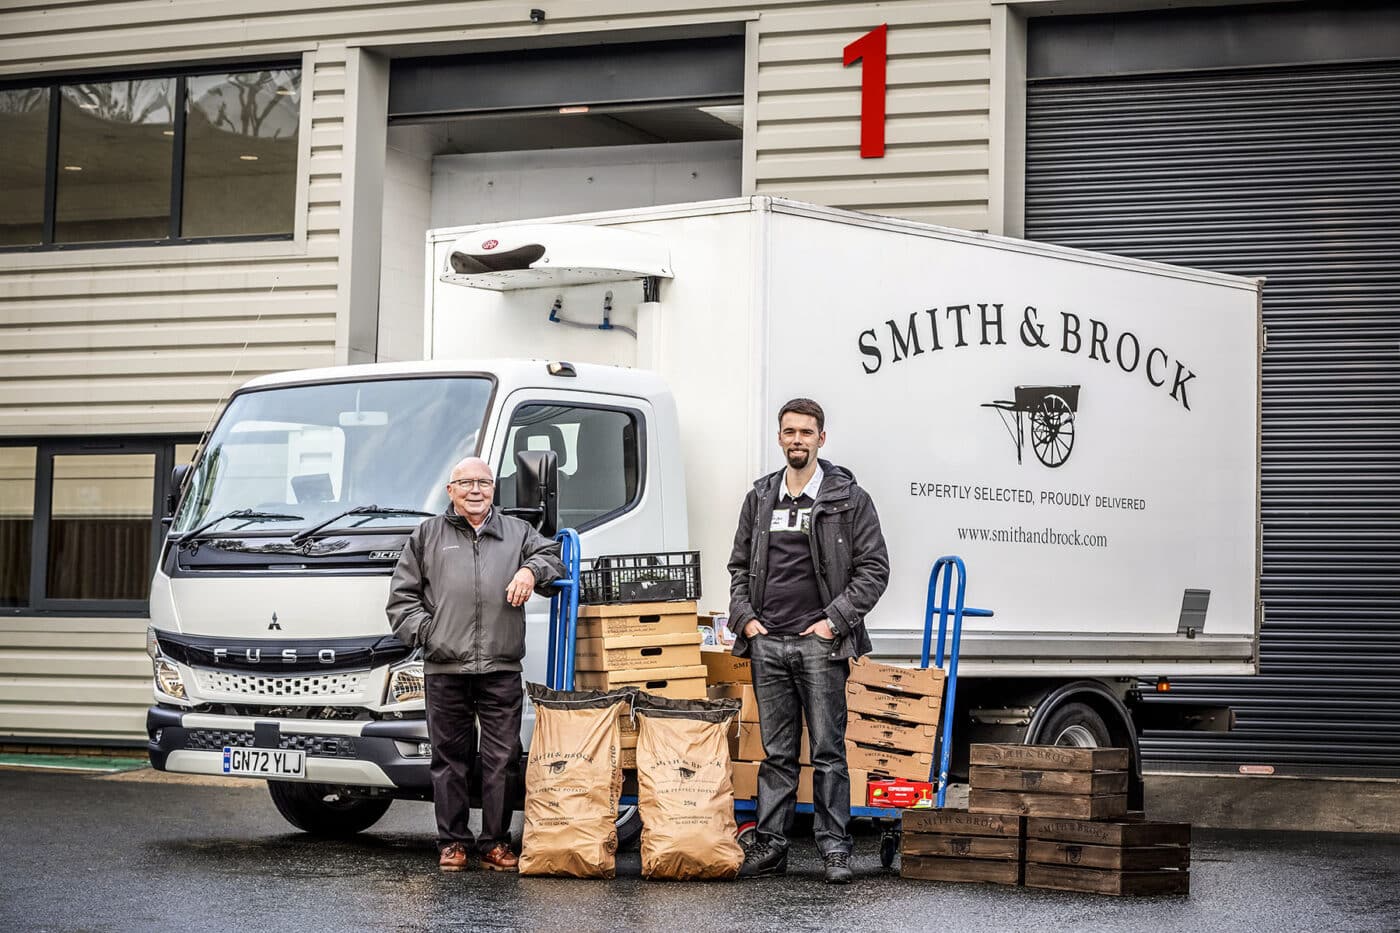 Fruit and vegetable wholesaler Smith & Brock has capped a landmark year by commissioning its first temperature-controlled truck from the latest FUSO Canter range.